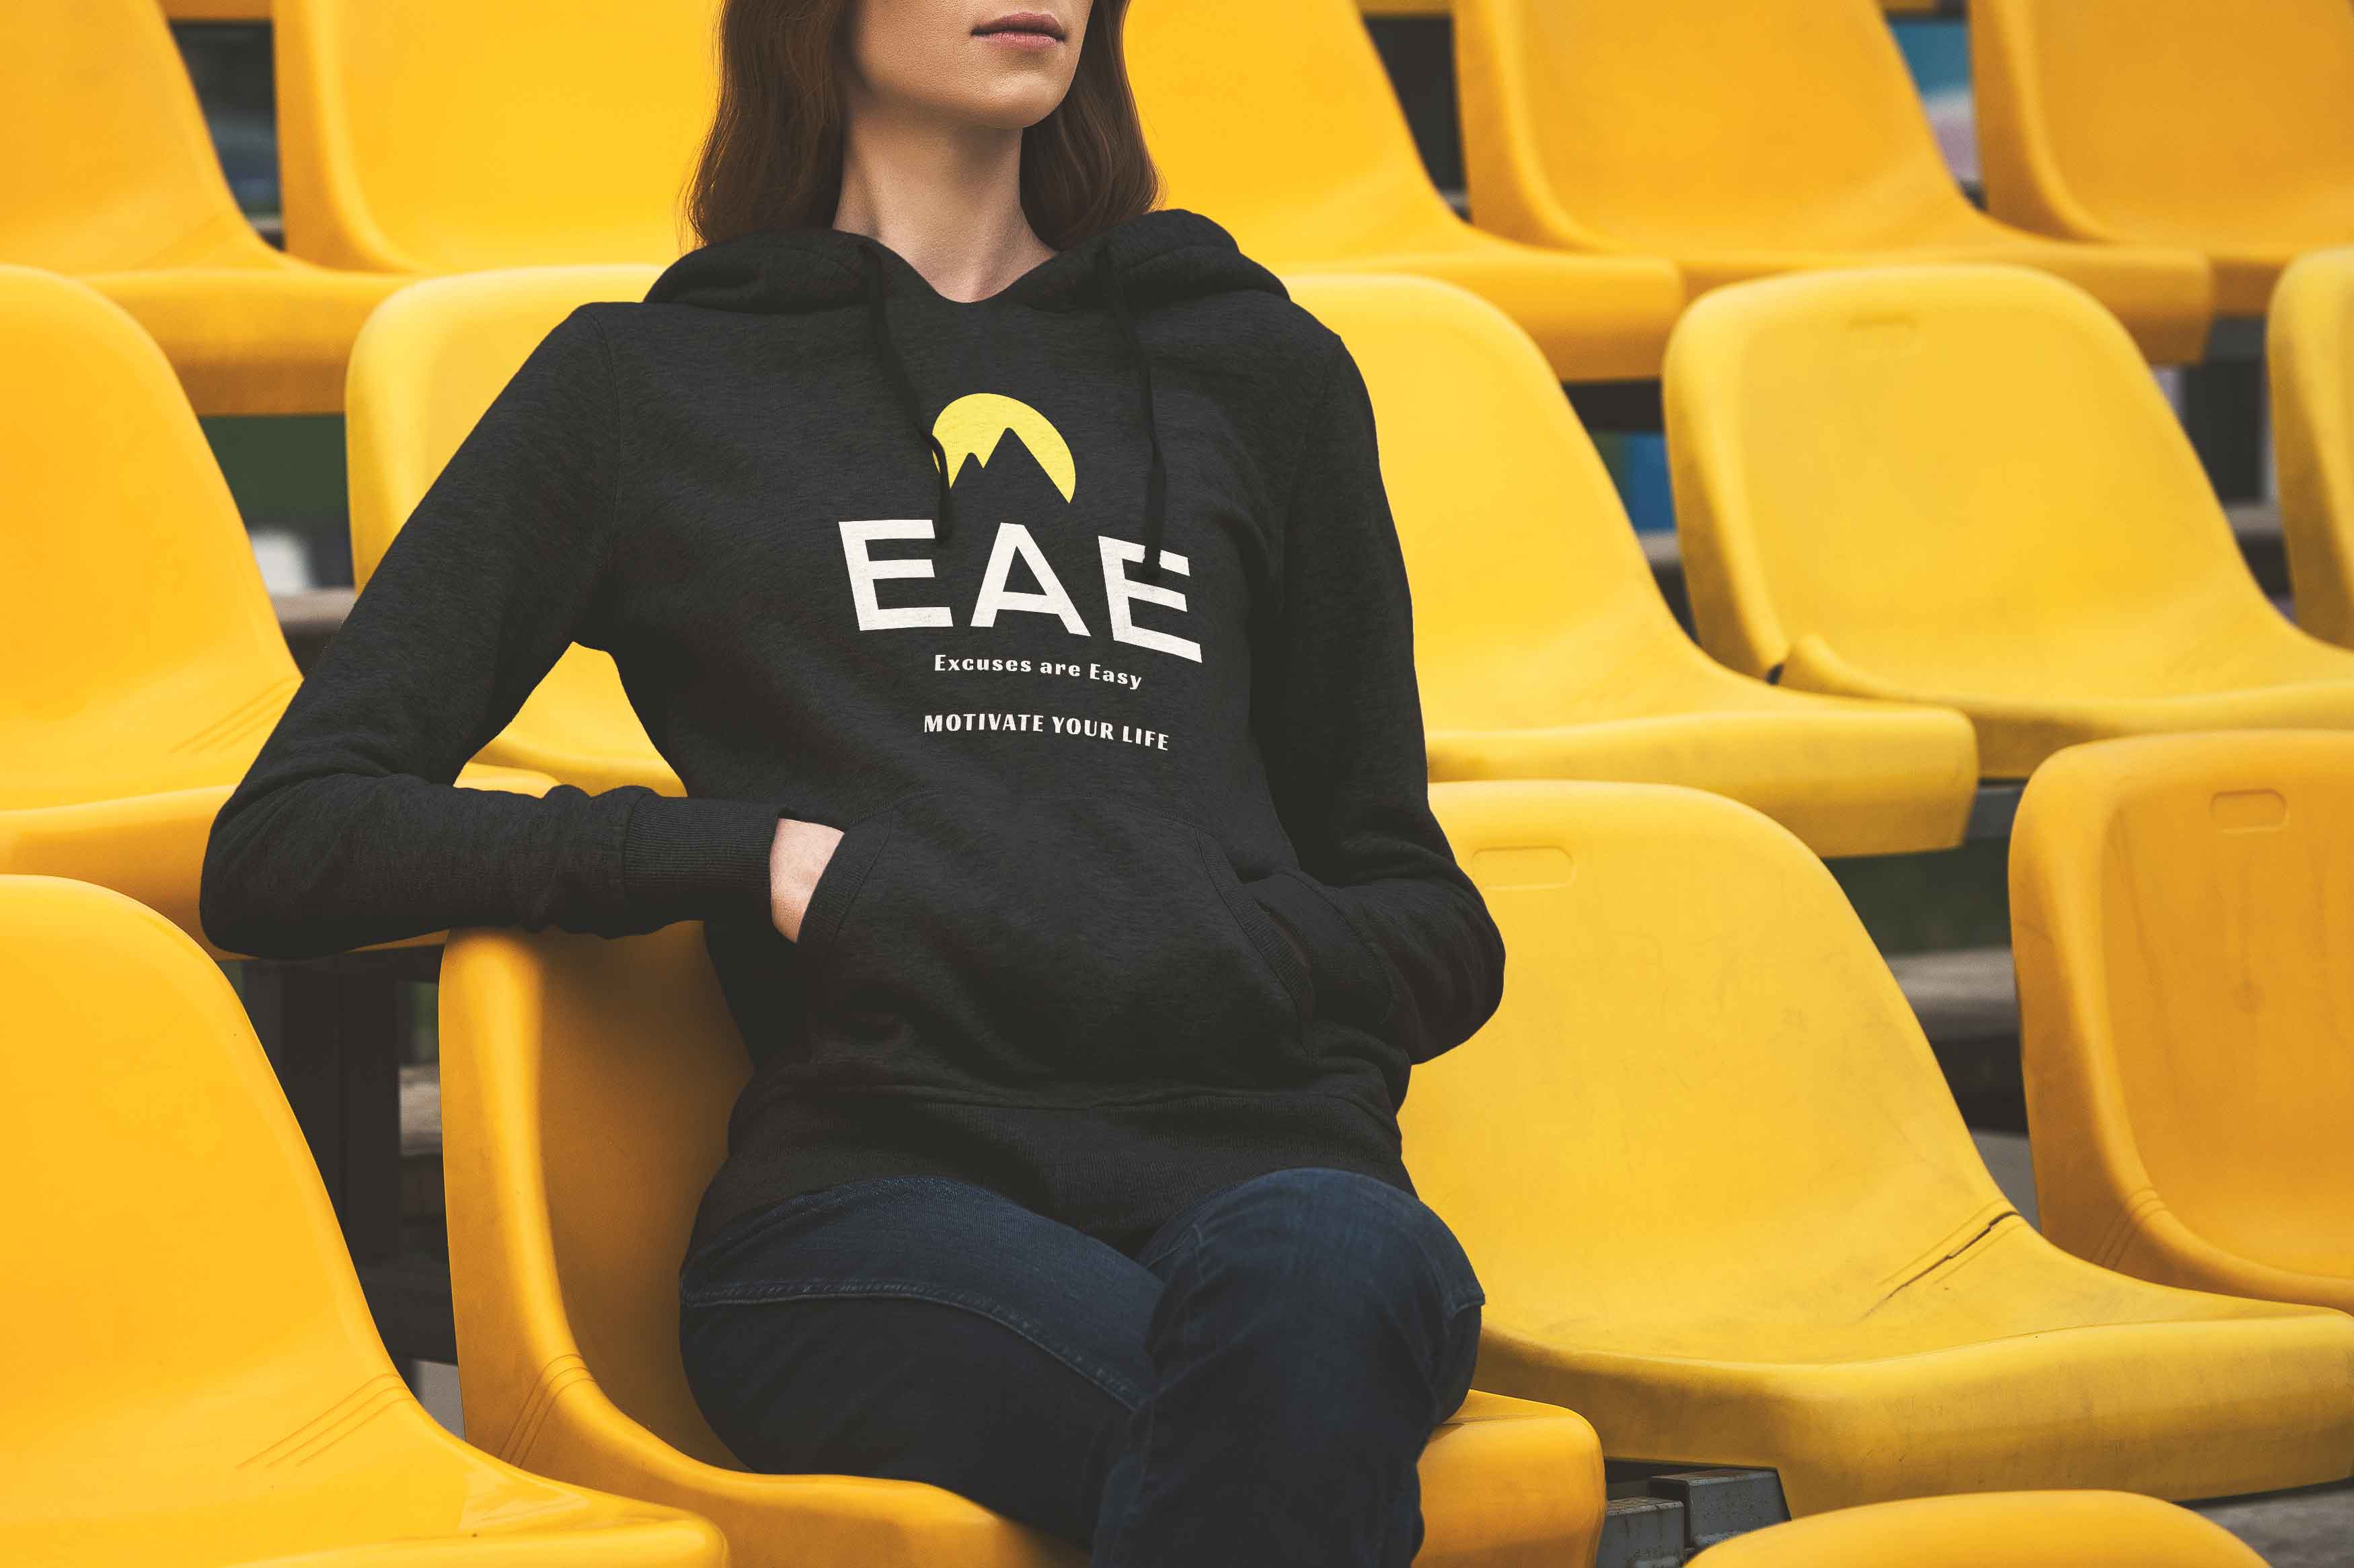 collections/attractive-young-femaleon-yellow-bleachers-black-hoodie.jpg